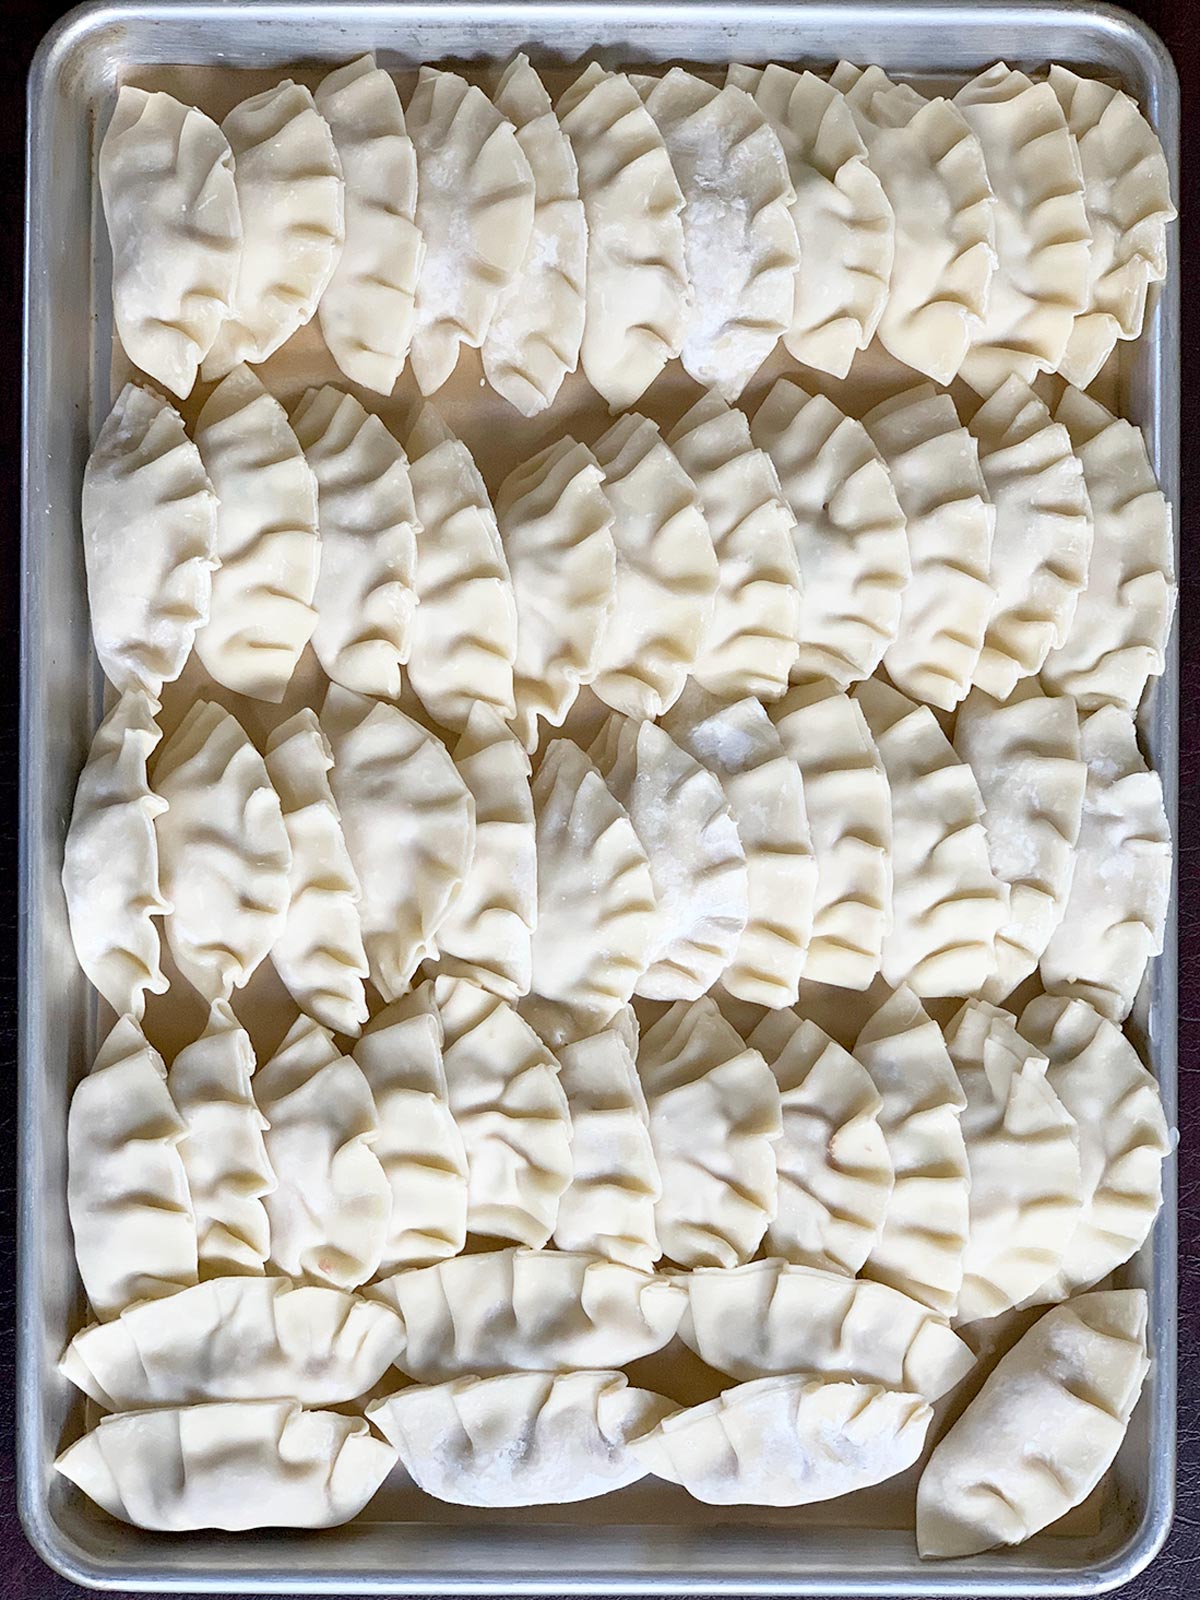 Uncooked mandu on a sheet tray ready to be cooked or refrigerated.